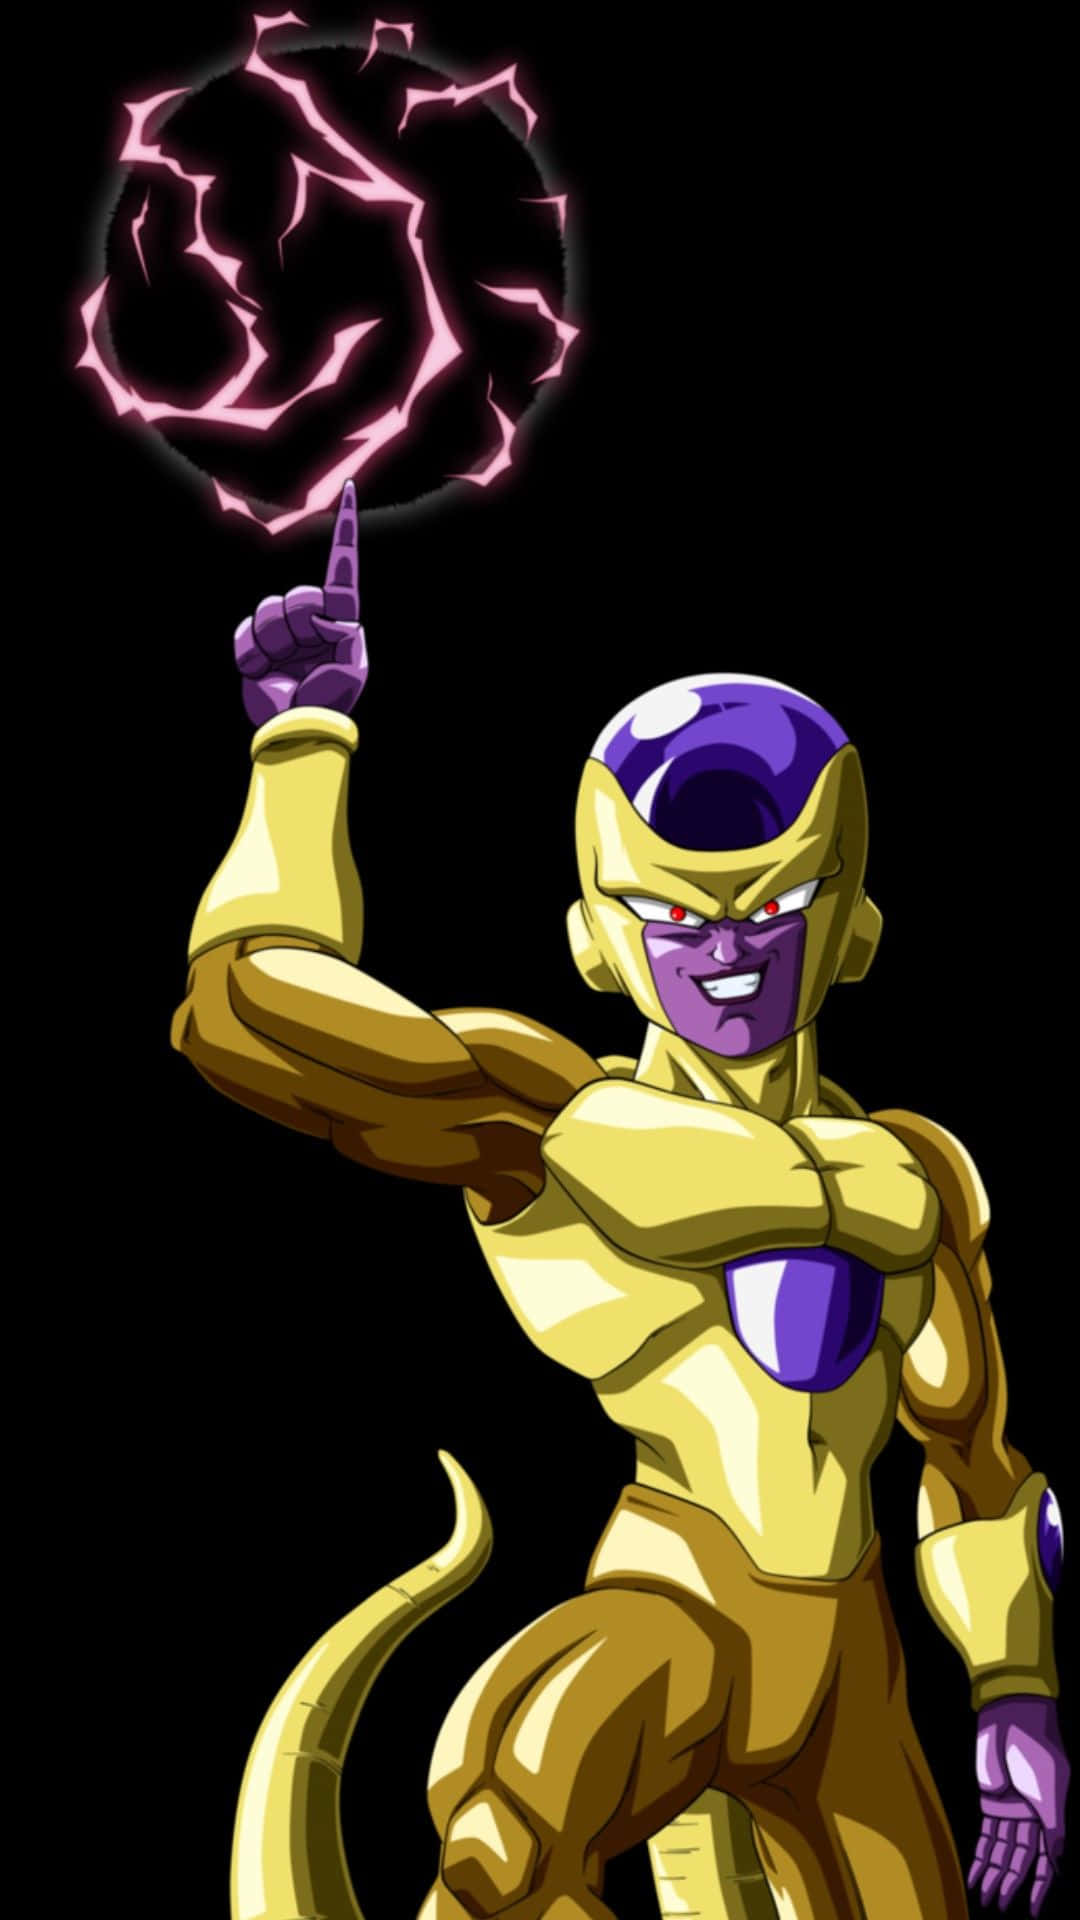 FRIEZA ANIMATED WALLPAPER DOWNLOAD for Android - YouTube